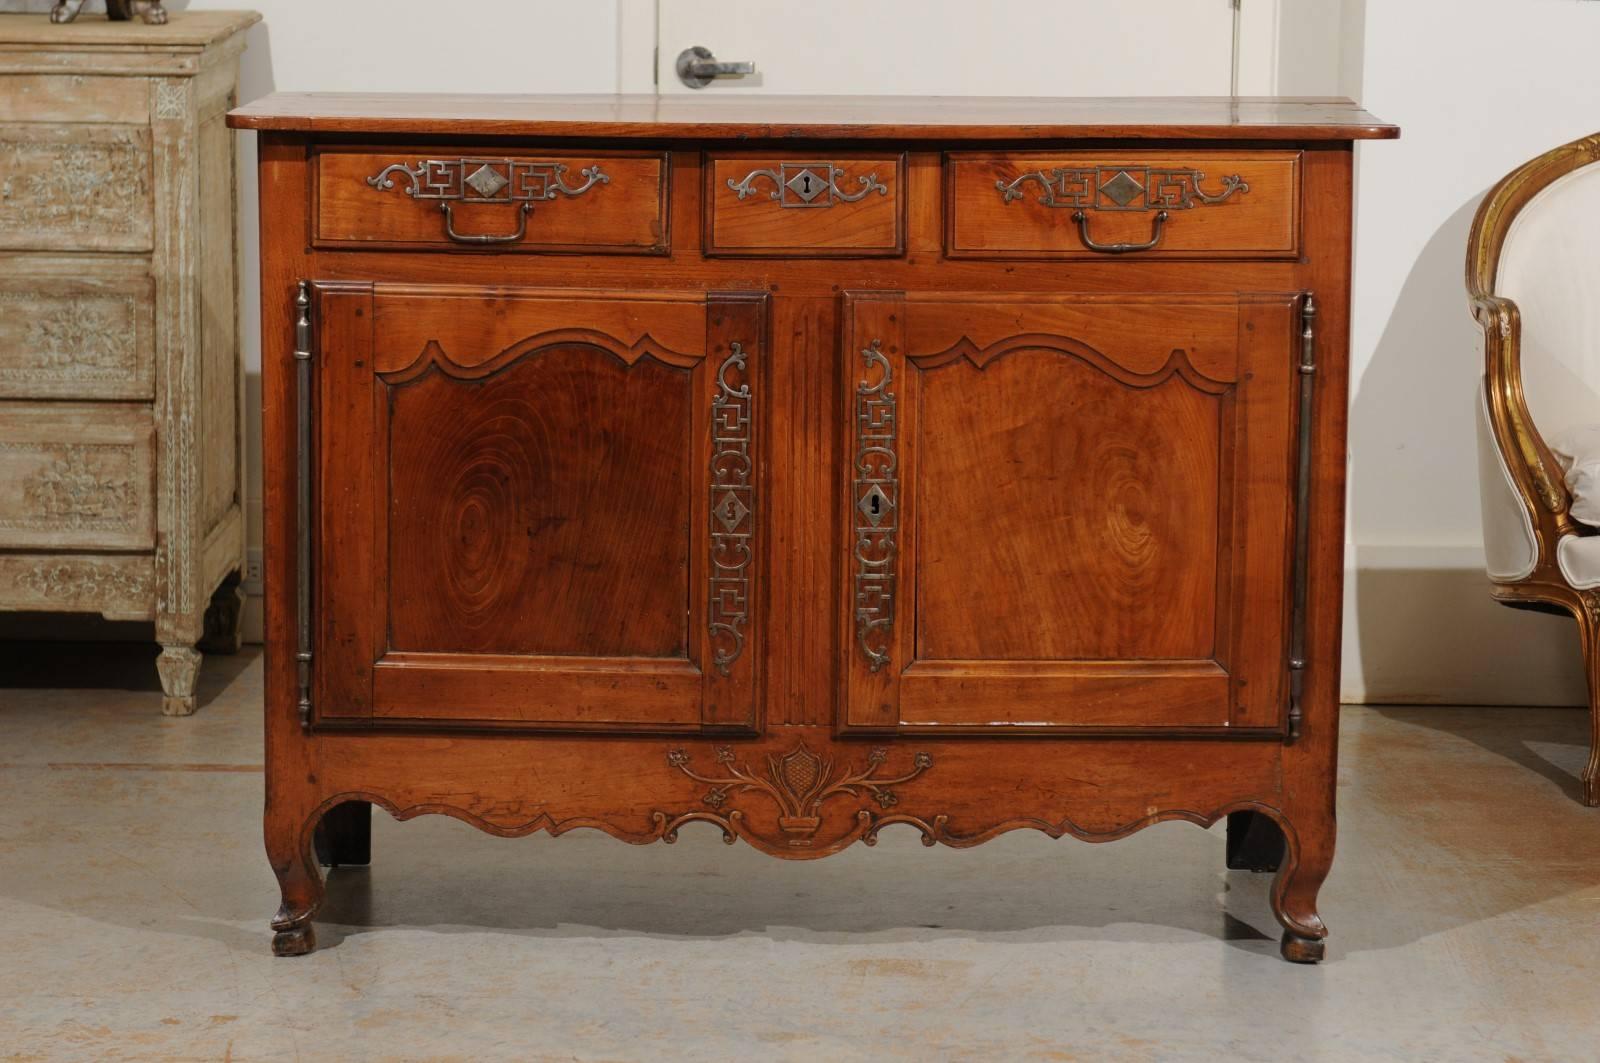 A French cherry three-drawer, two-door buffet with scalloped apron and scrolled feet from the 19th century. This French buffet features a rectangular top with rounded corners in the front, overhanging three drawers, a smaller one flanked with two